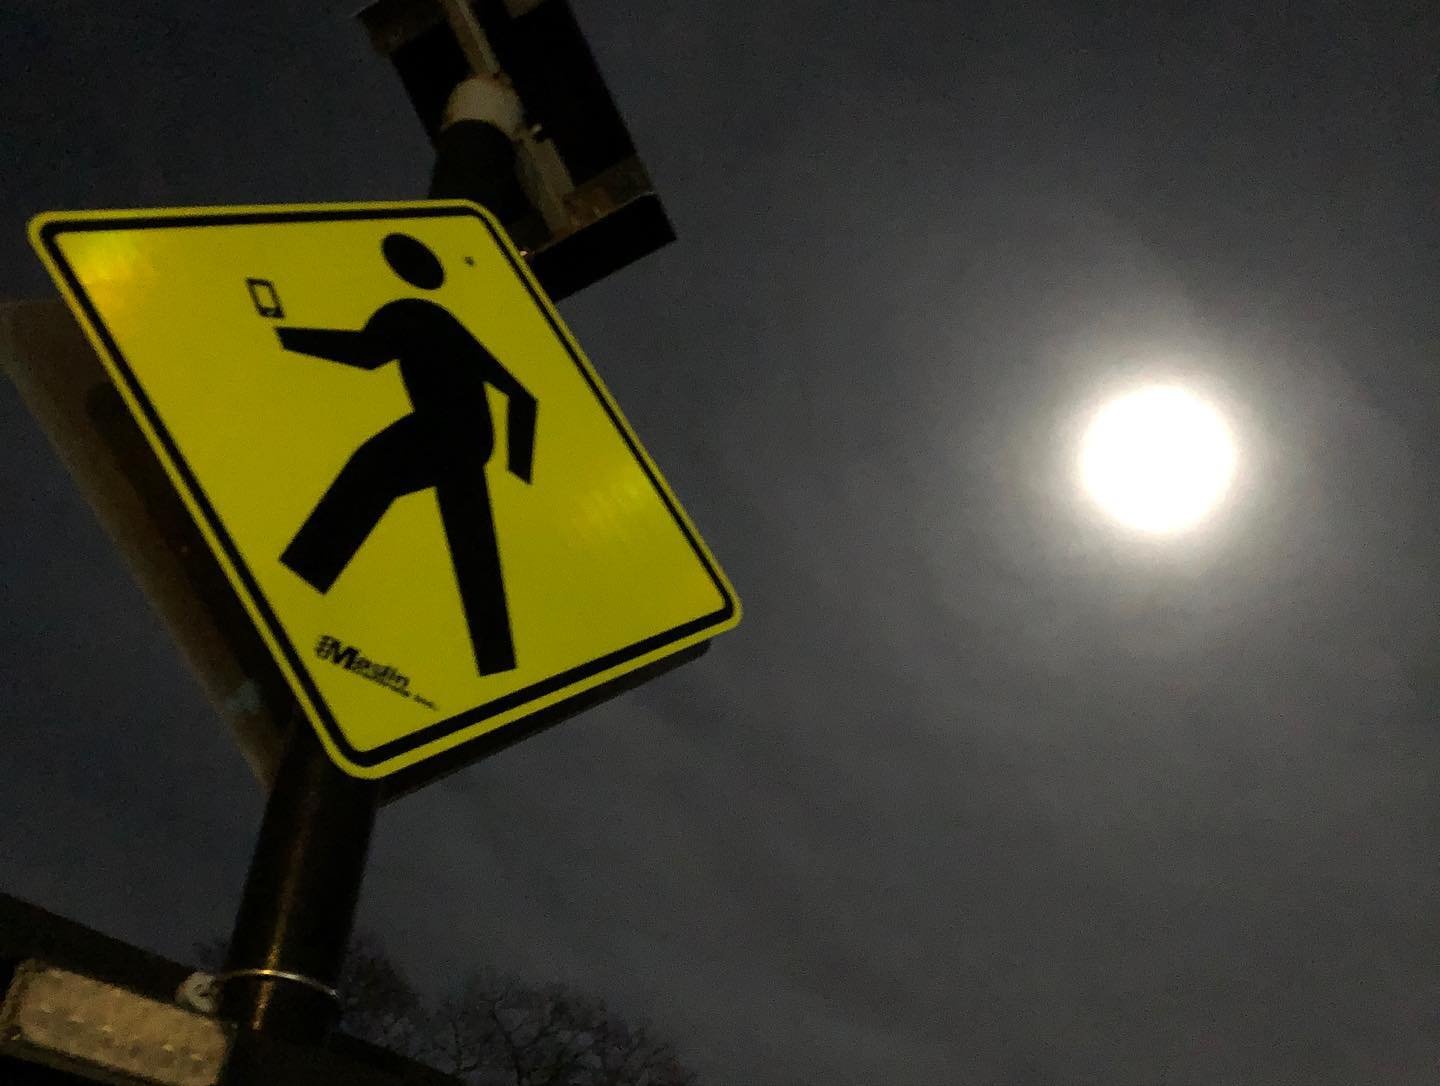 CAUTION: Don&rsquo;t miss taking in the moon because you&rsquo;re looking down at your phone. #cautioncellphones 📱👀⚠️